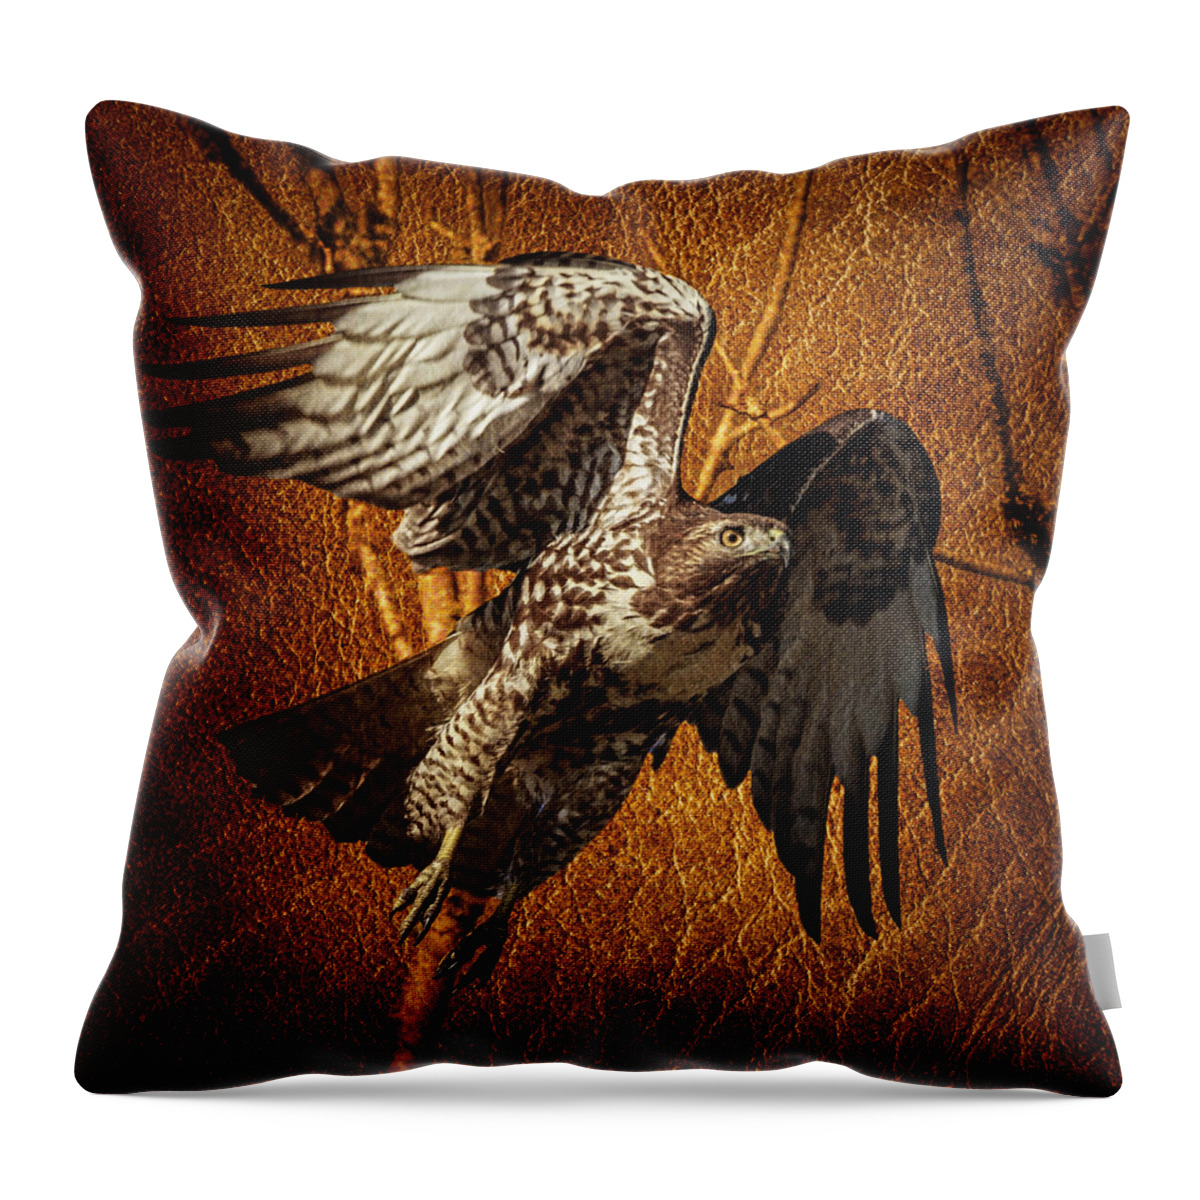 Hawk On Leather Throw Pillow featuring the photograph Hawk On Leather by Wes and Dotty Weber